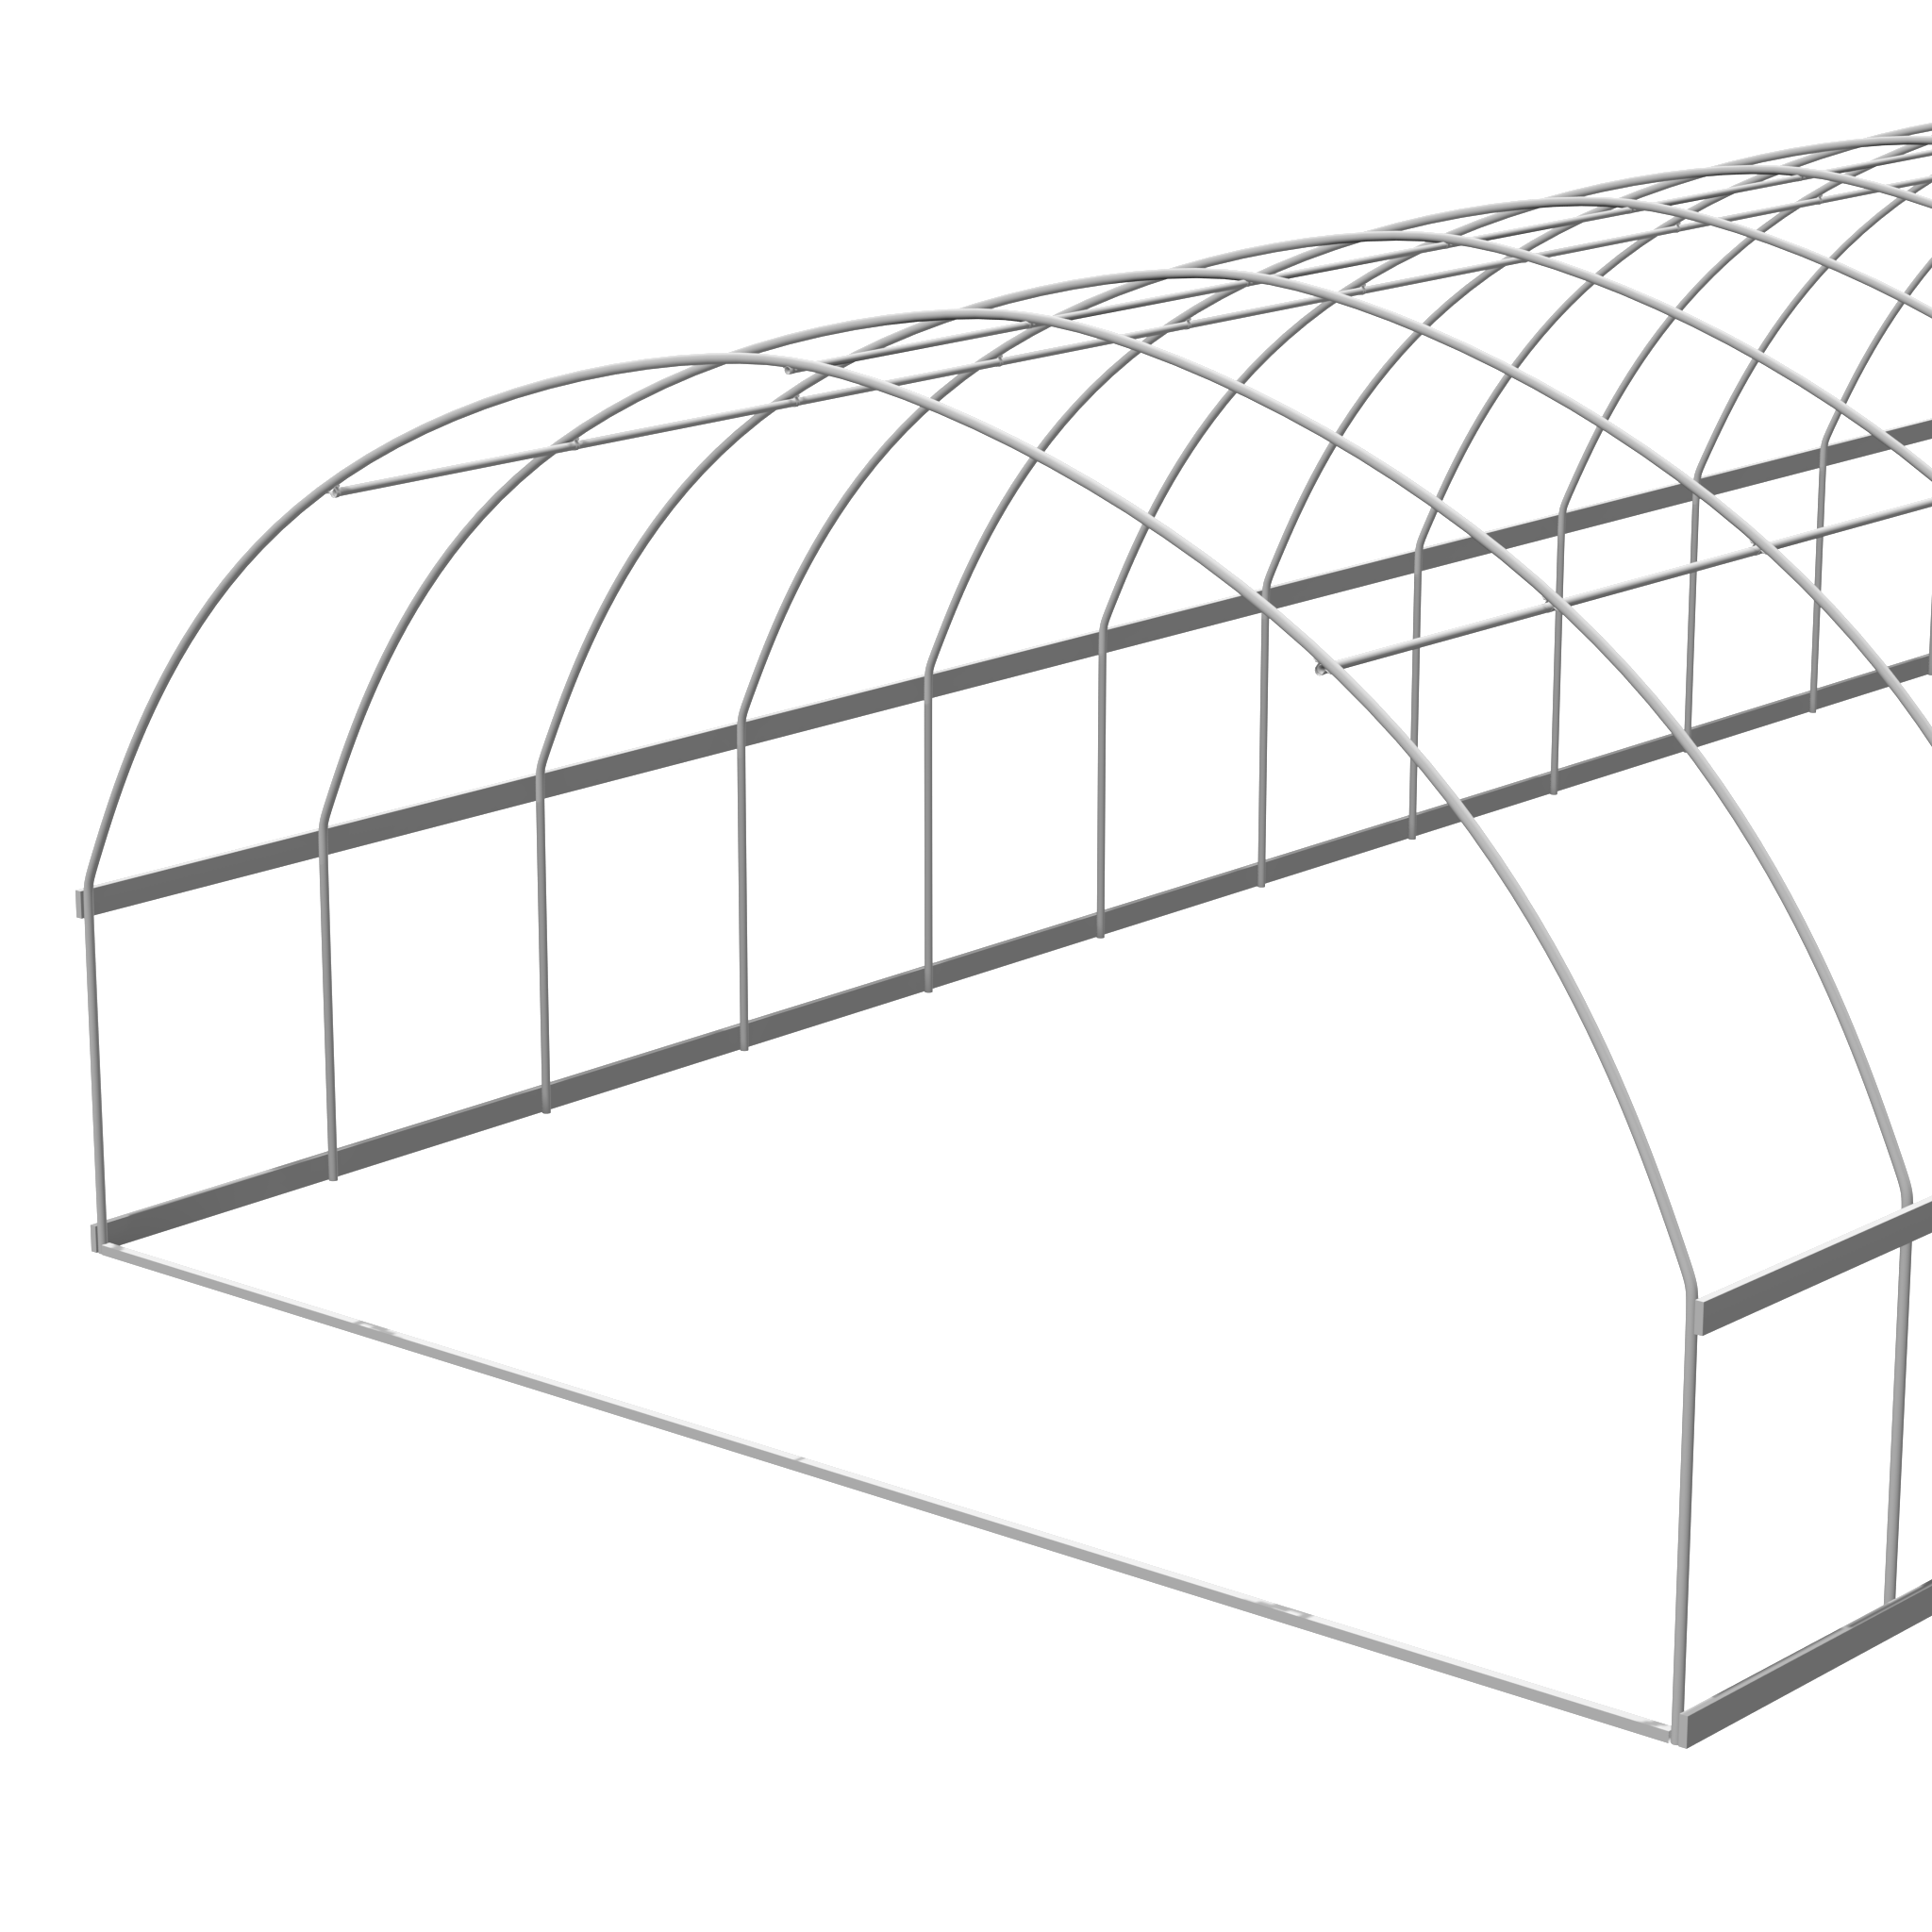 30'x80' Greenhouse Frame Quonset